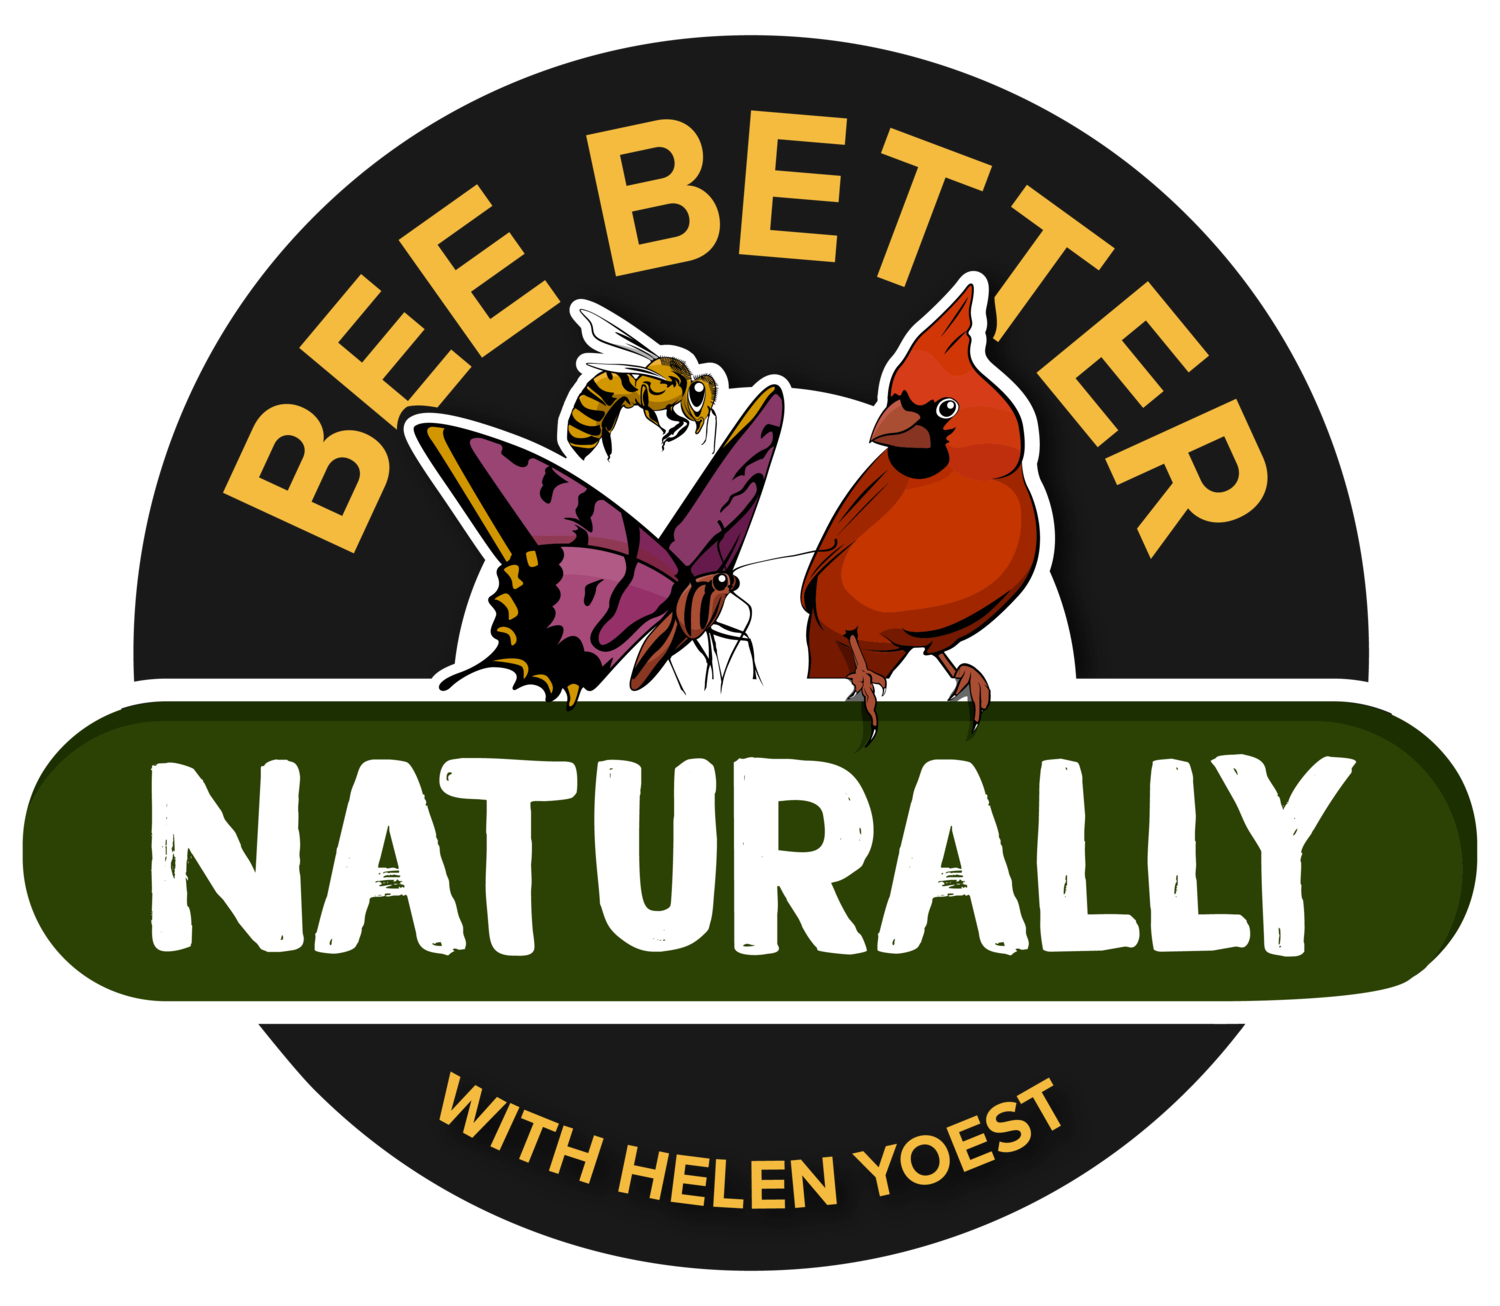 Bee Better Naturally with Helen Yoest